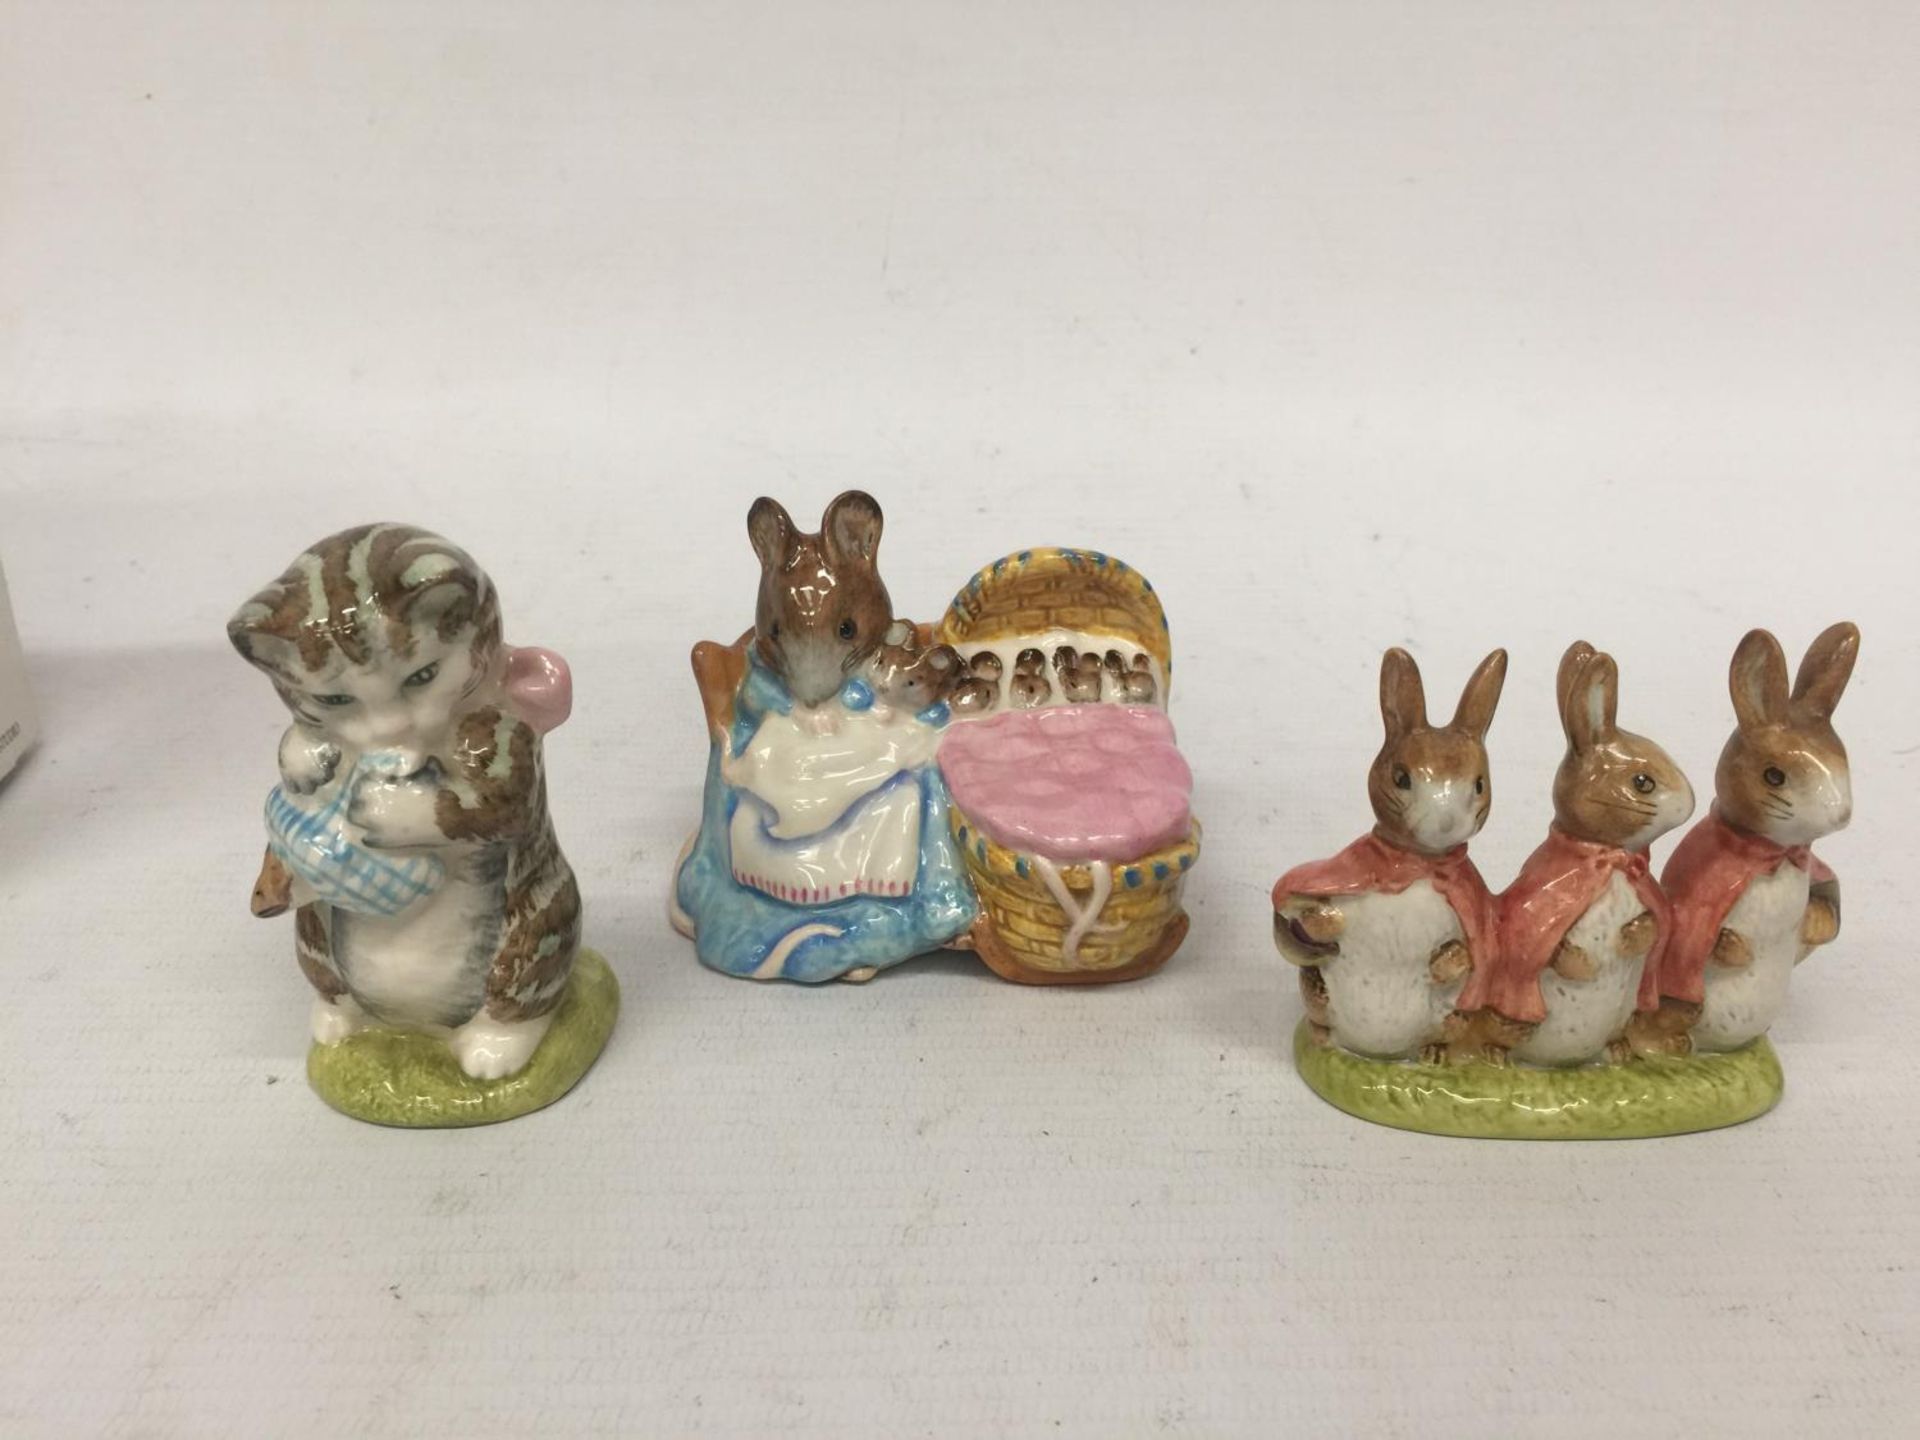 FIVE BESWICK BEATRIX POTTER FIGURES TO INCLUDE MISS MOPPET, JEREMY FISHER, MUNCO MUNCO, FLOPSY MOPSY - Image 6 of 7